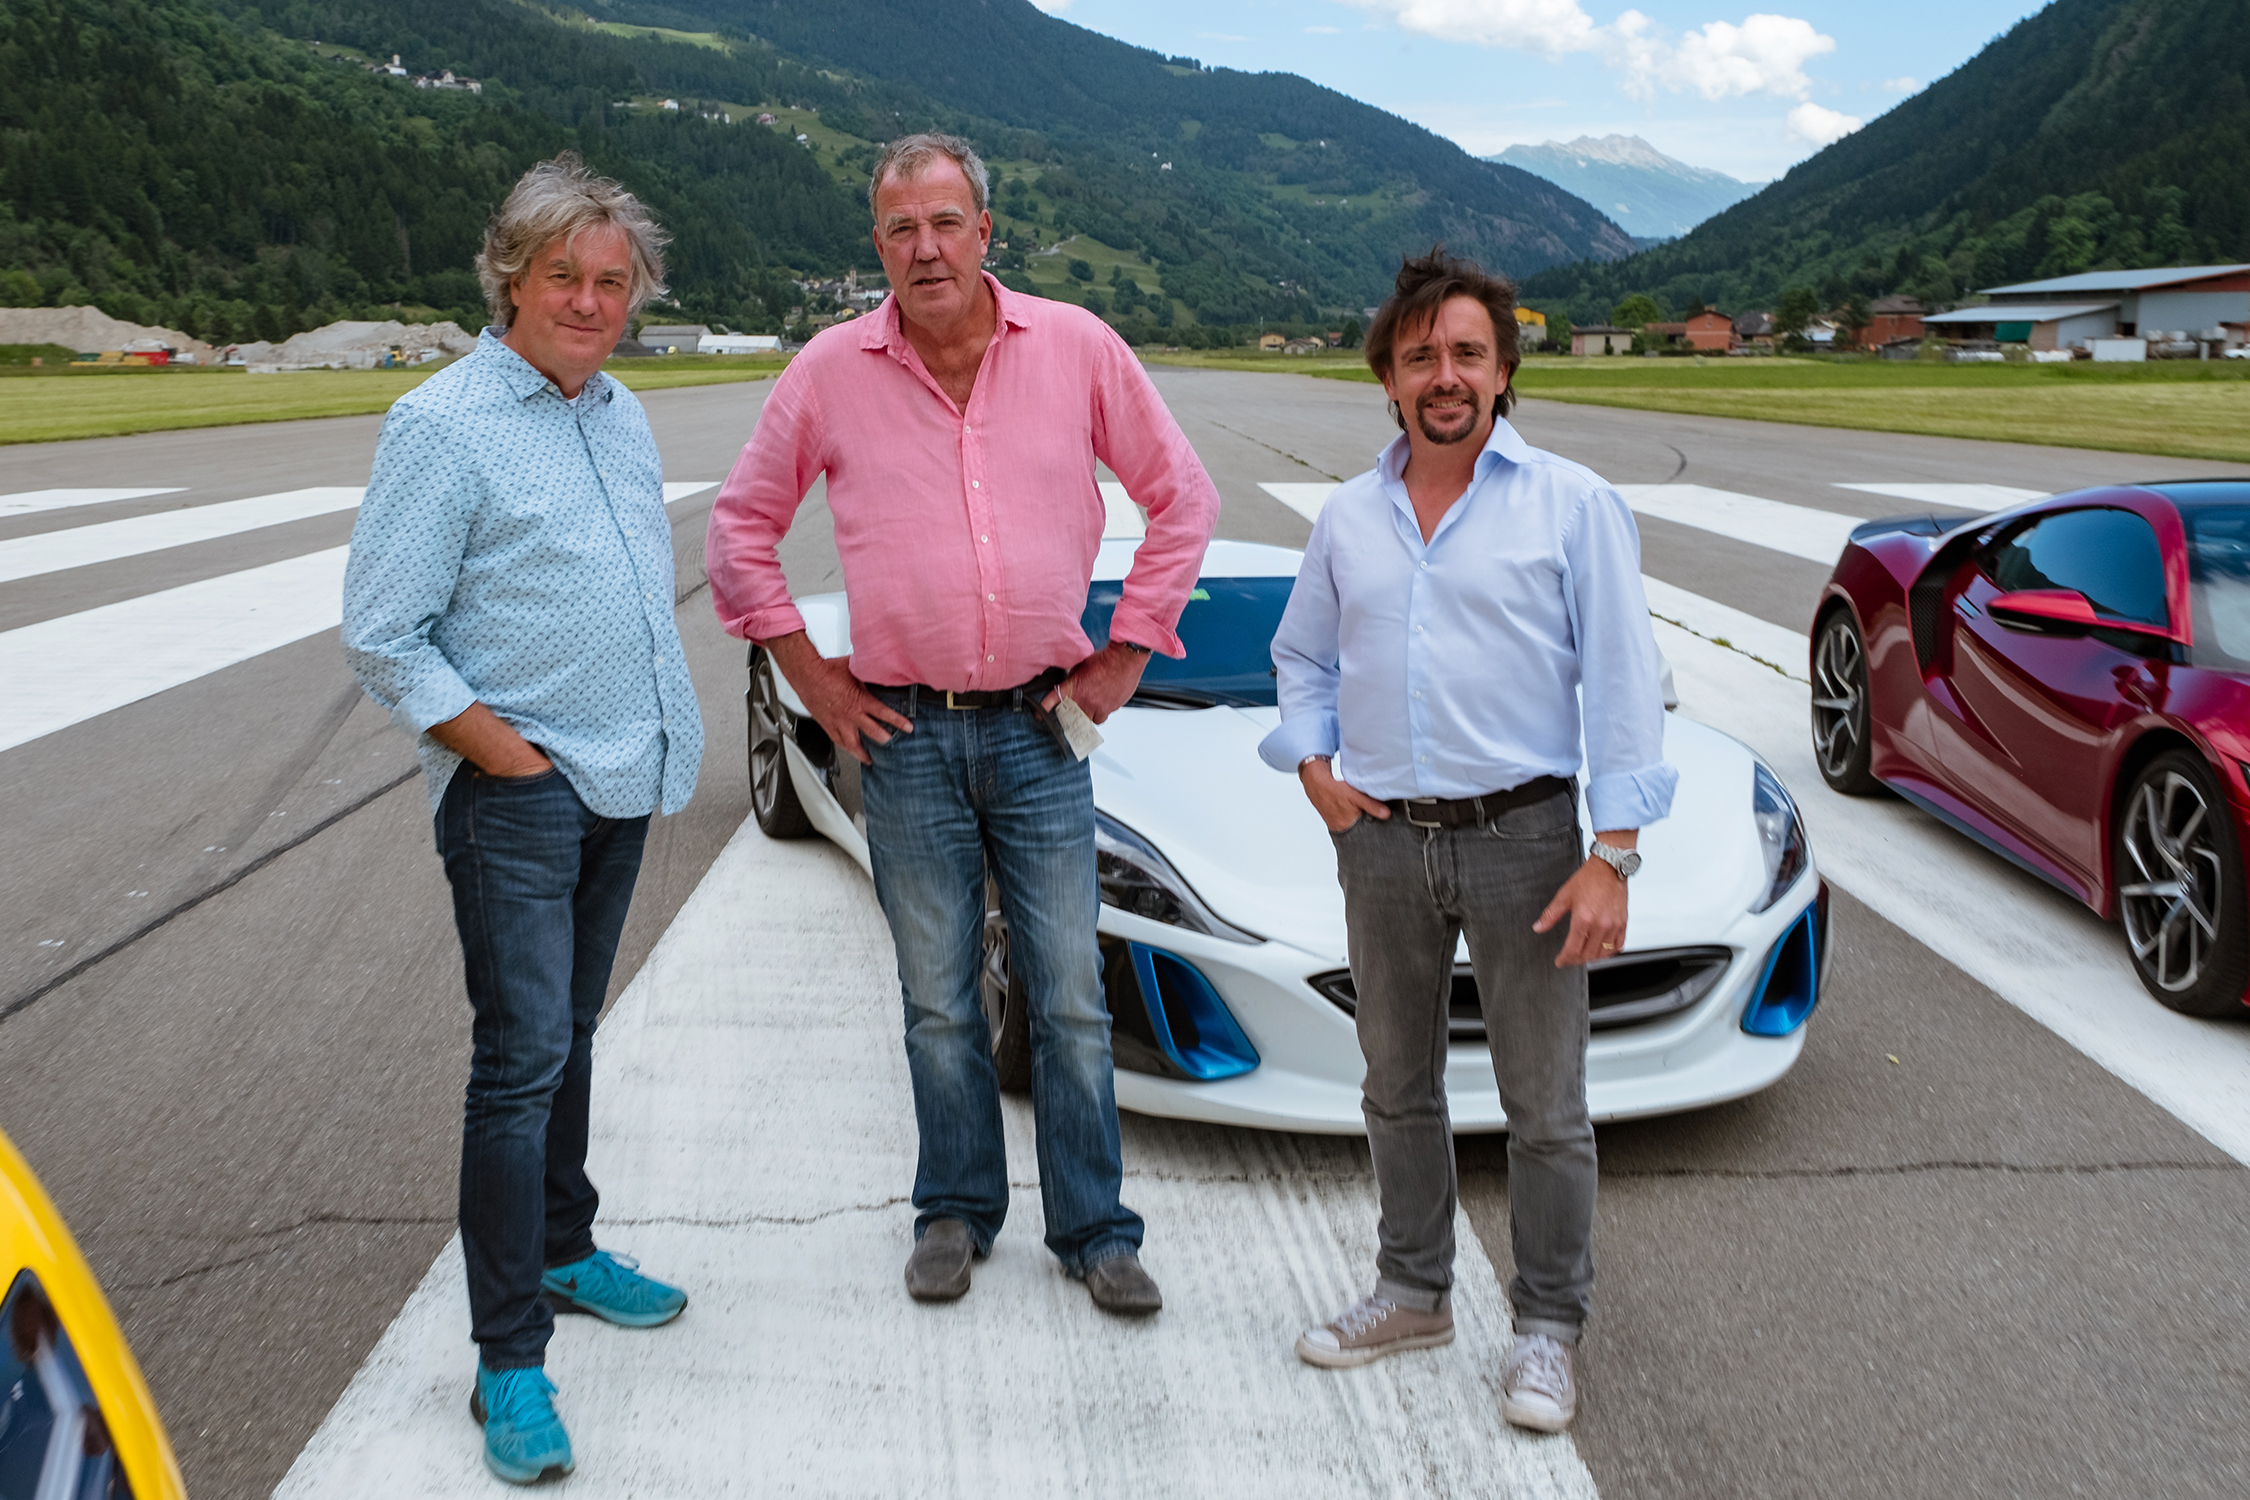 Jeremy Clarkson, James May and Richard Hammond in The Grand Tour Season 2